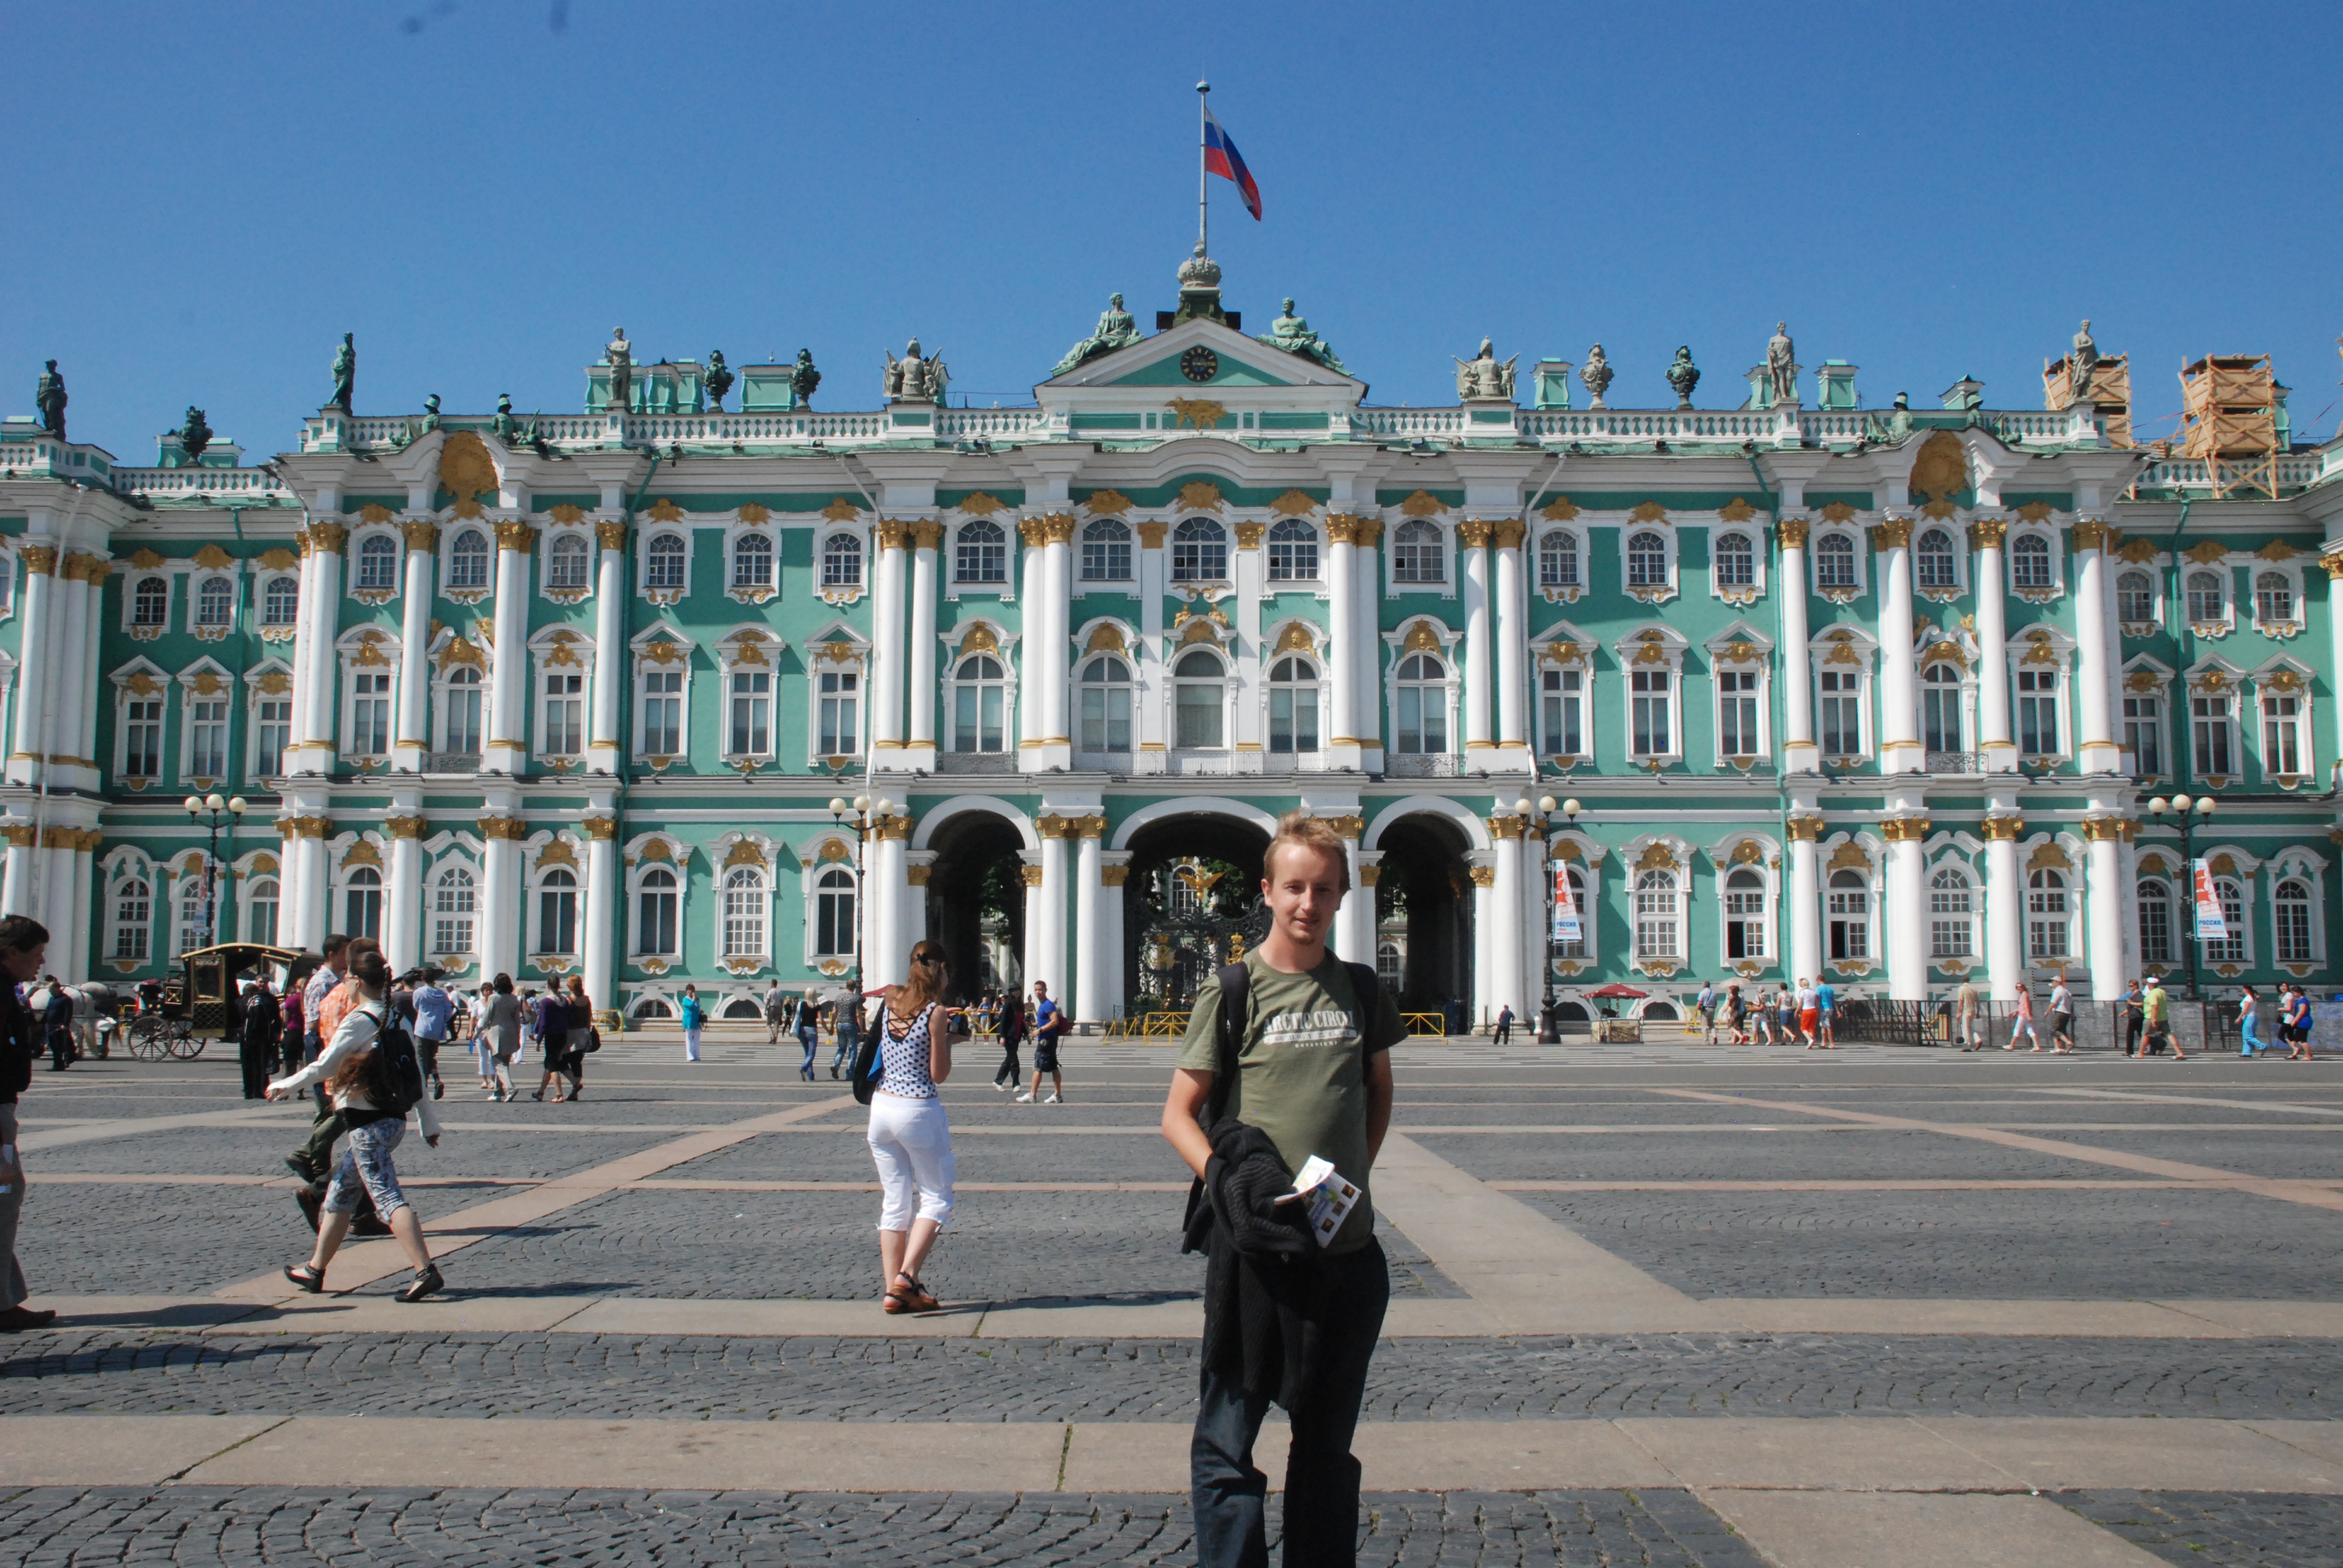 Sightseeing in St Petersburg | Mark on the Move